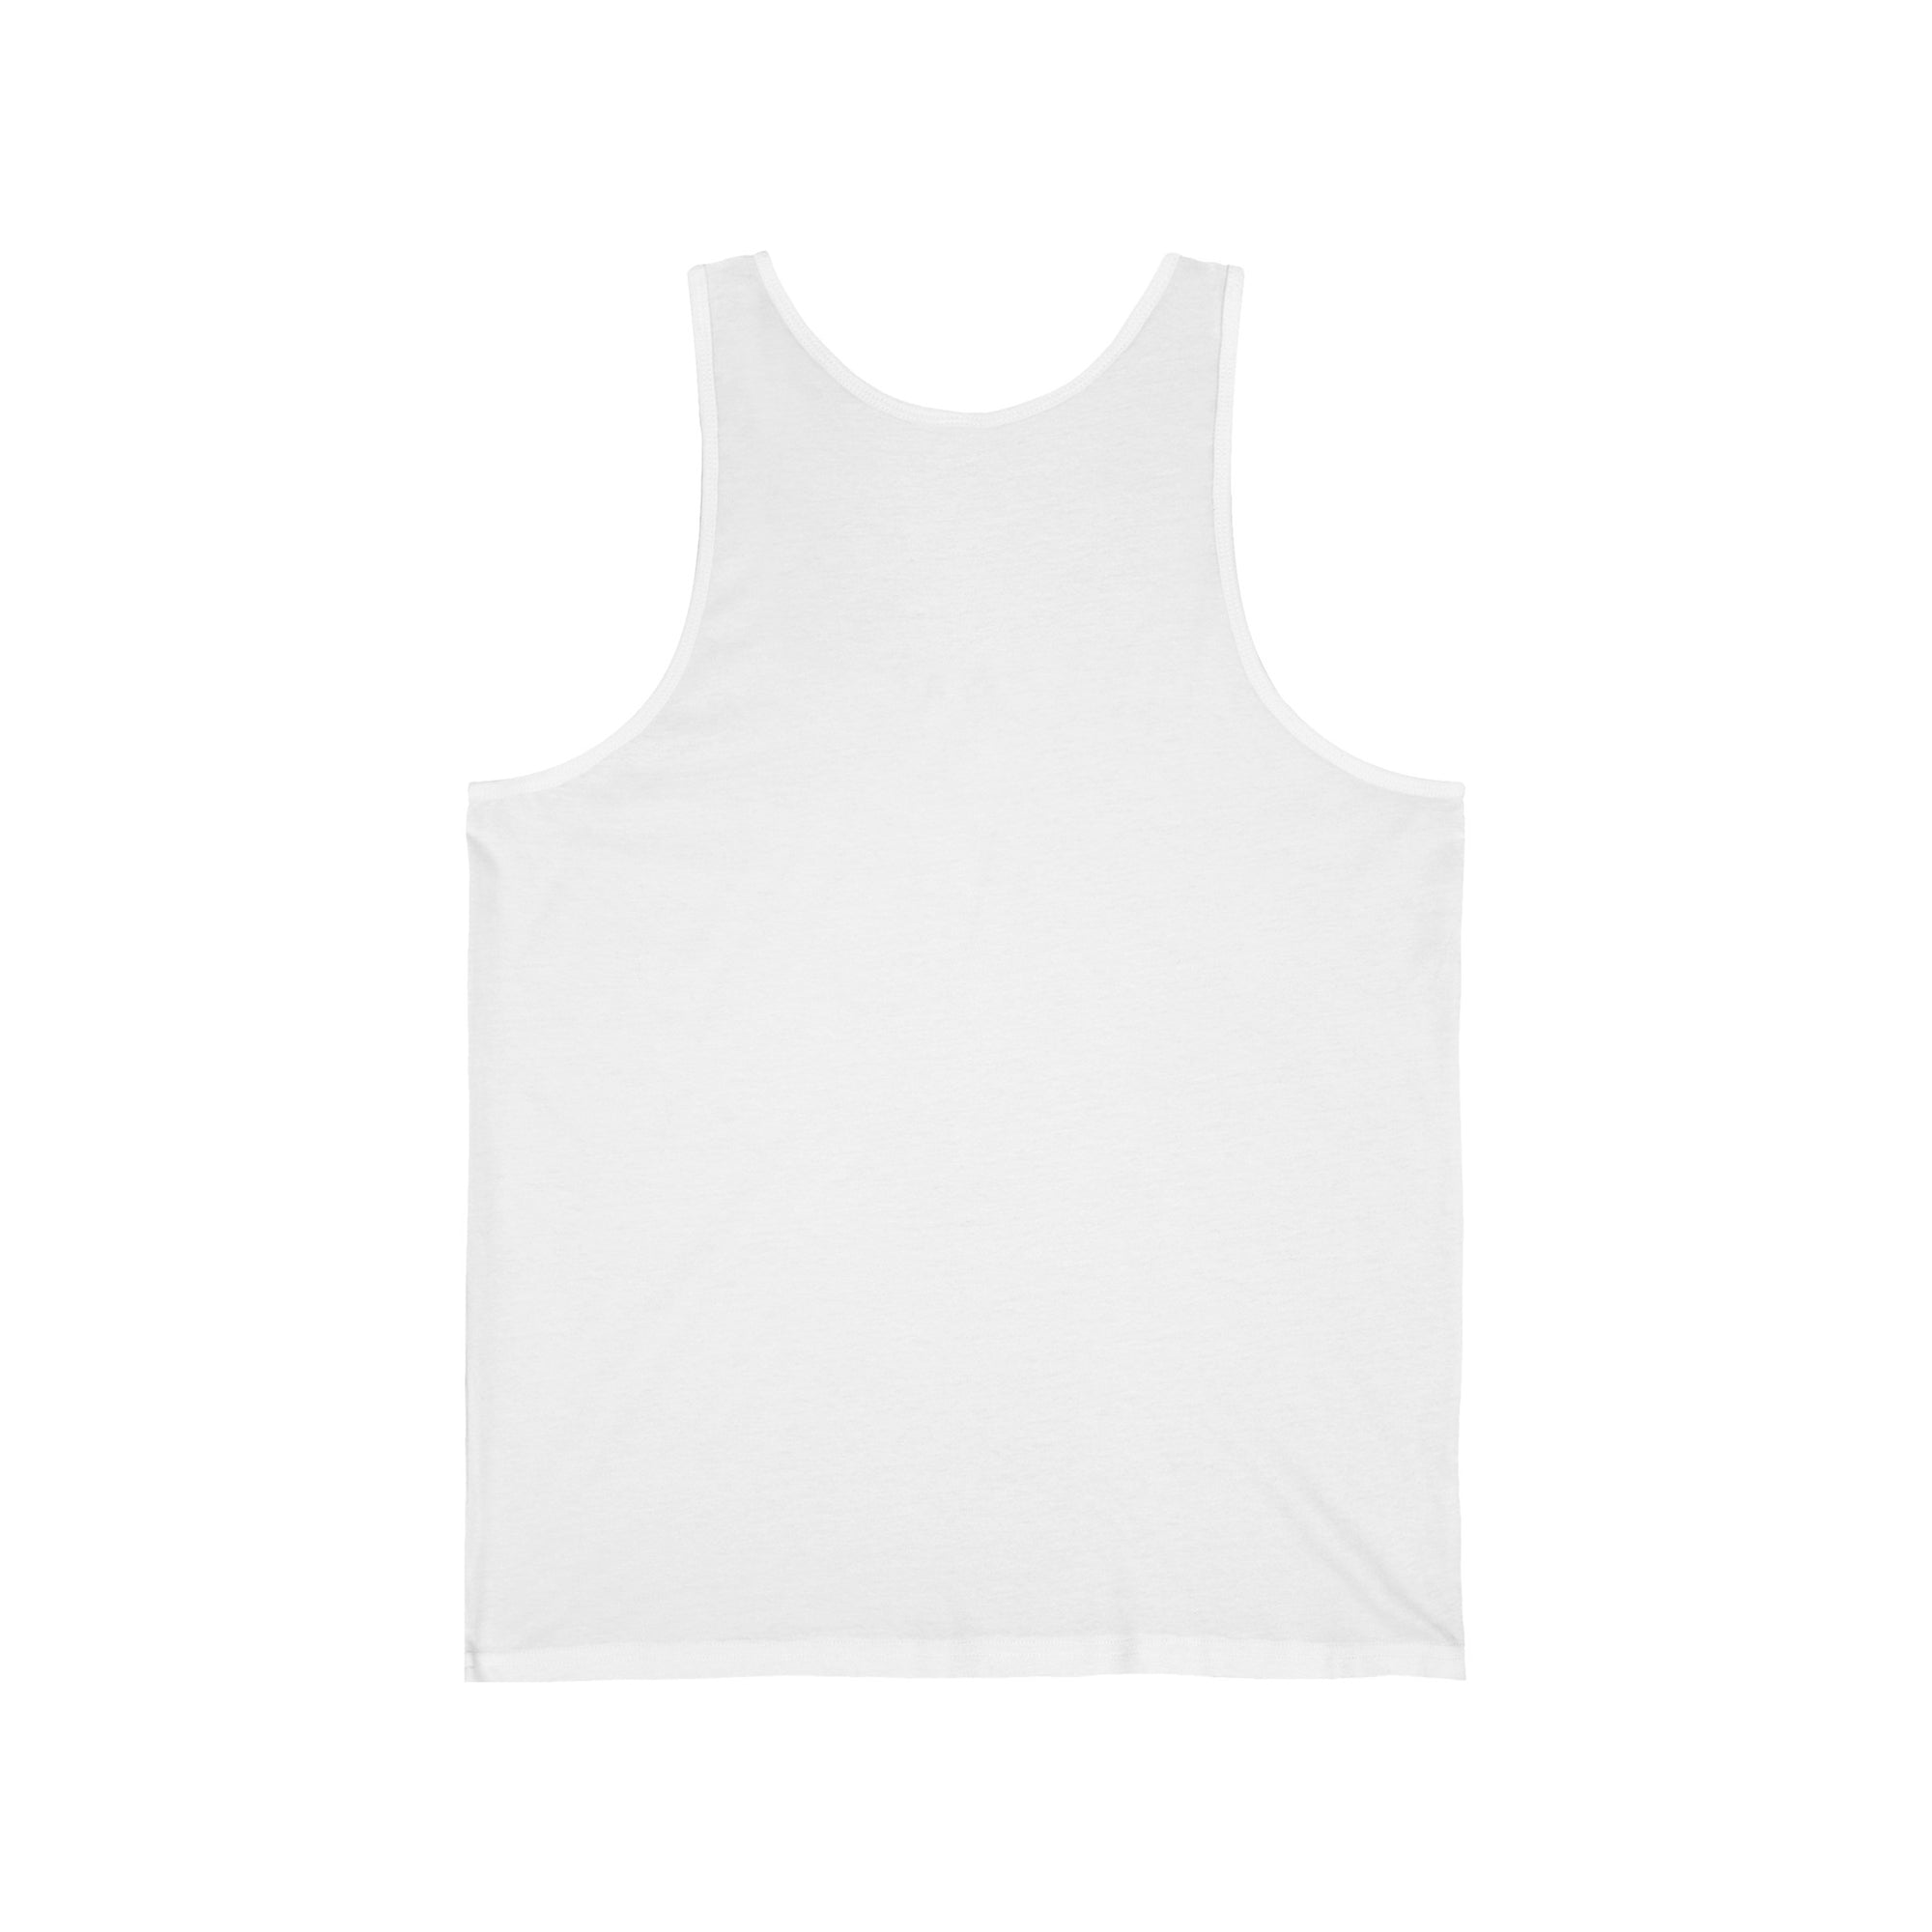 Cube - Norse Foundry Men's Tank Top